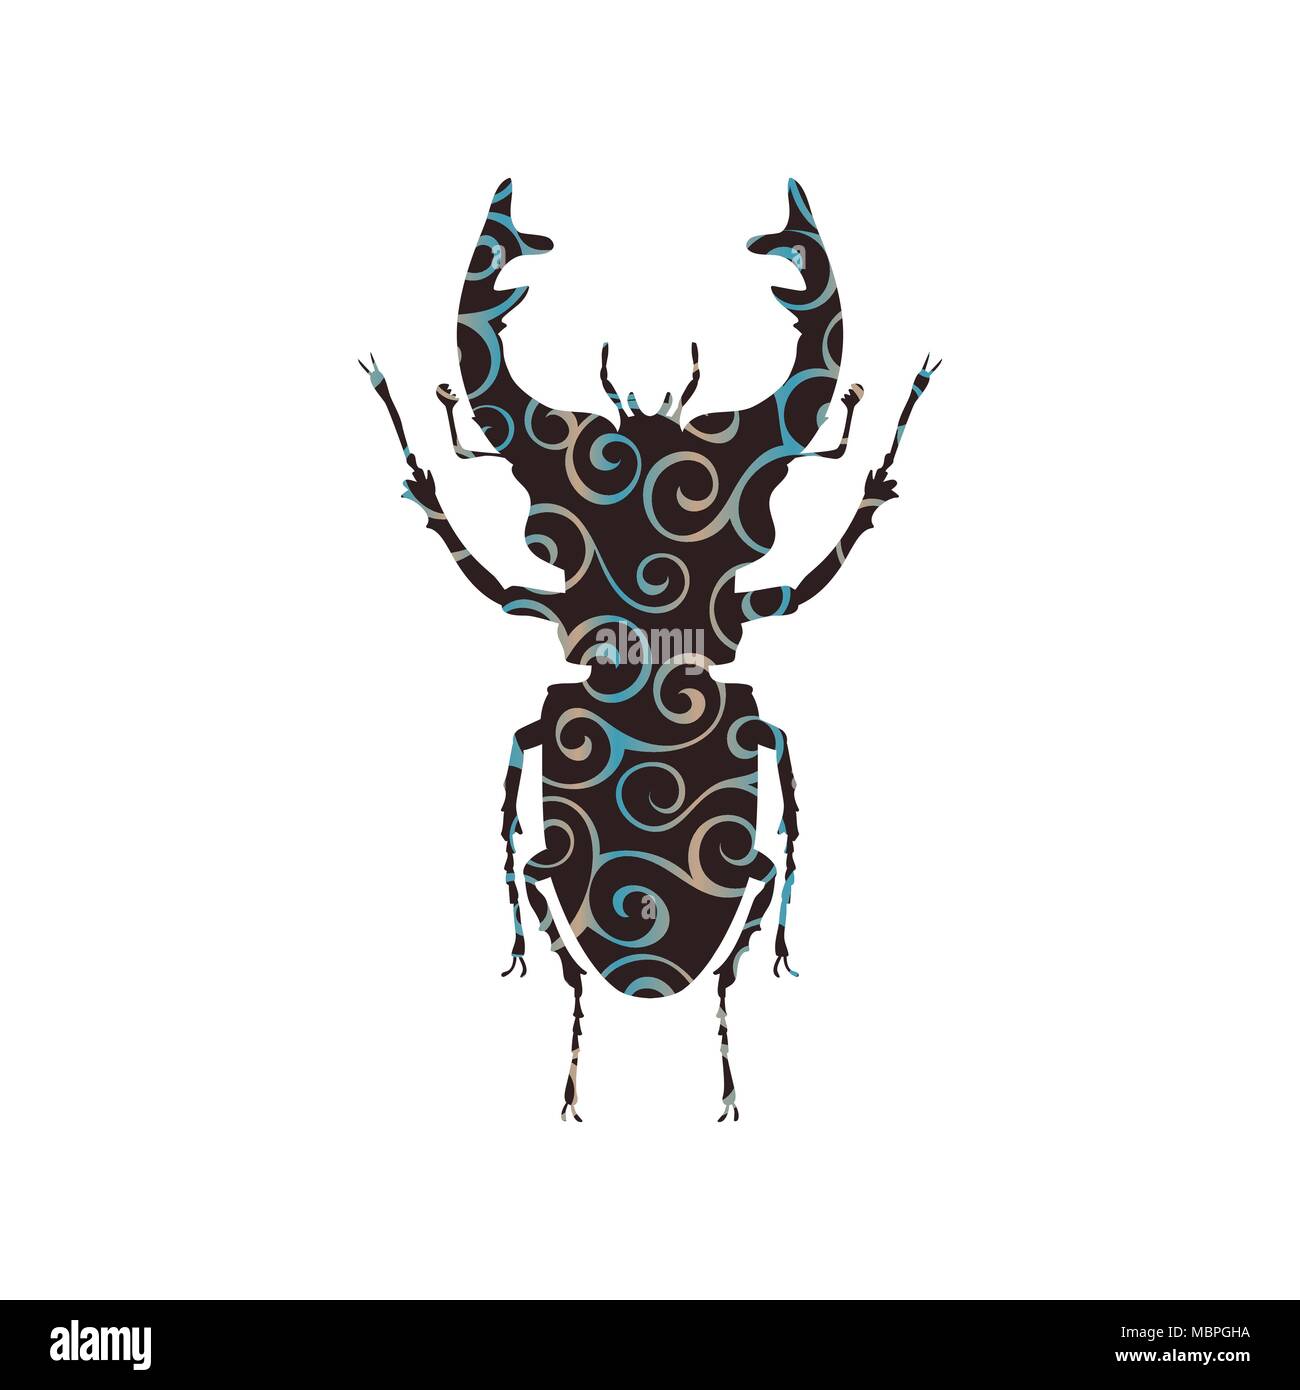 Insect exoskeleton Stock Vector Images - Alamy